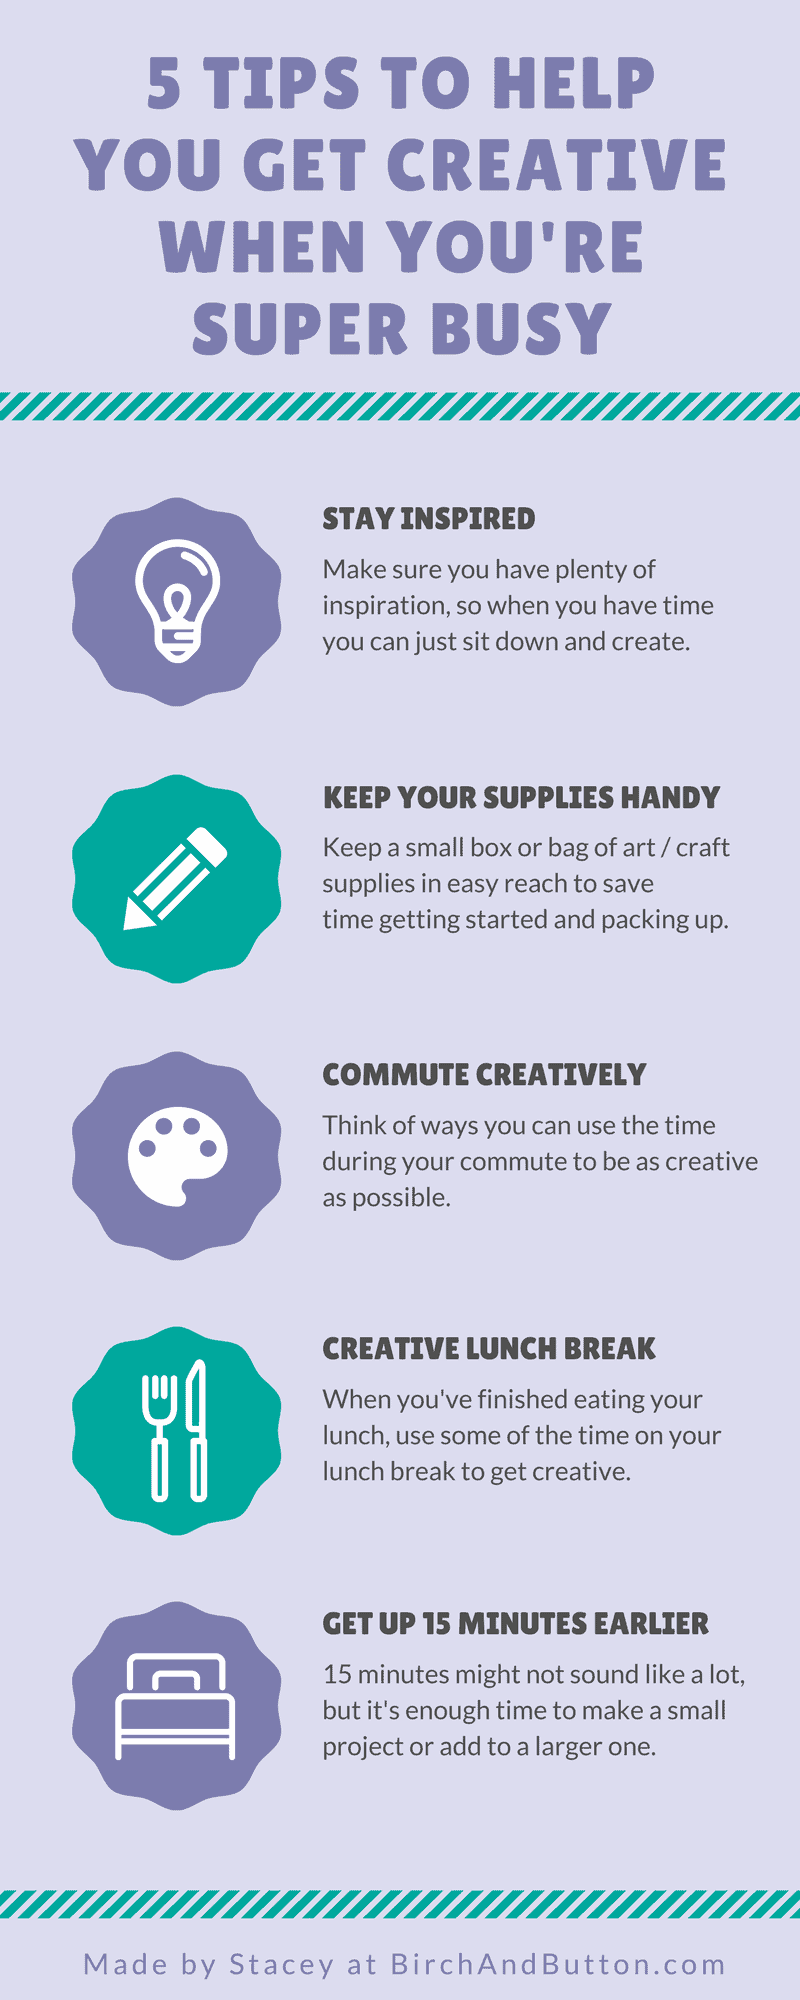 If you've been struggling to find the time or motivation to be creative recently, try my five tips to make it easier to be creative even when you’re super busy.